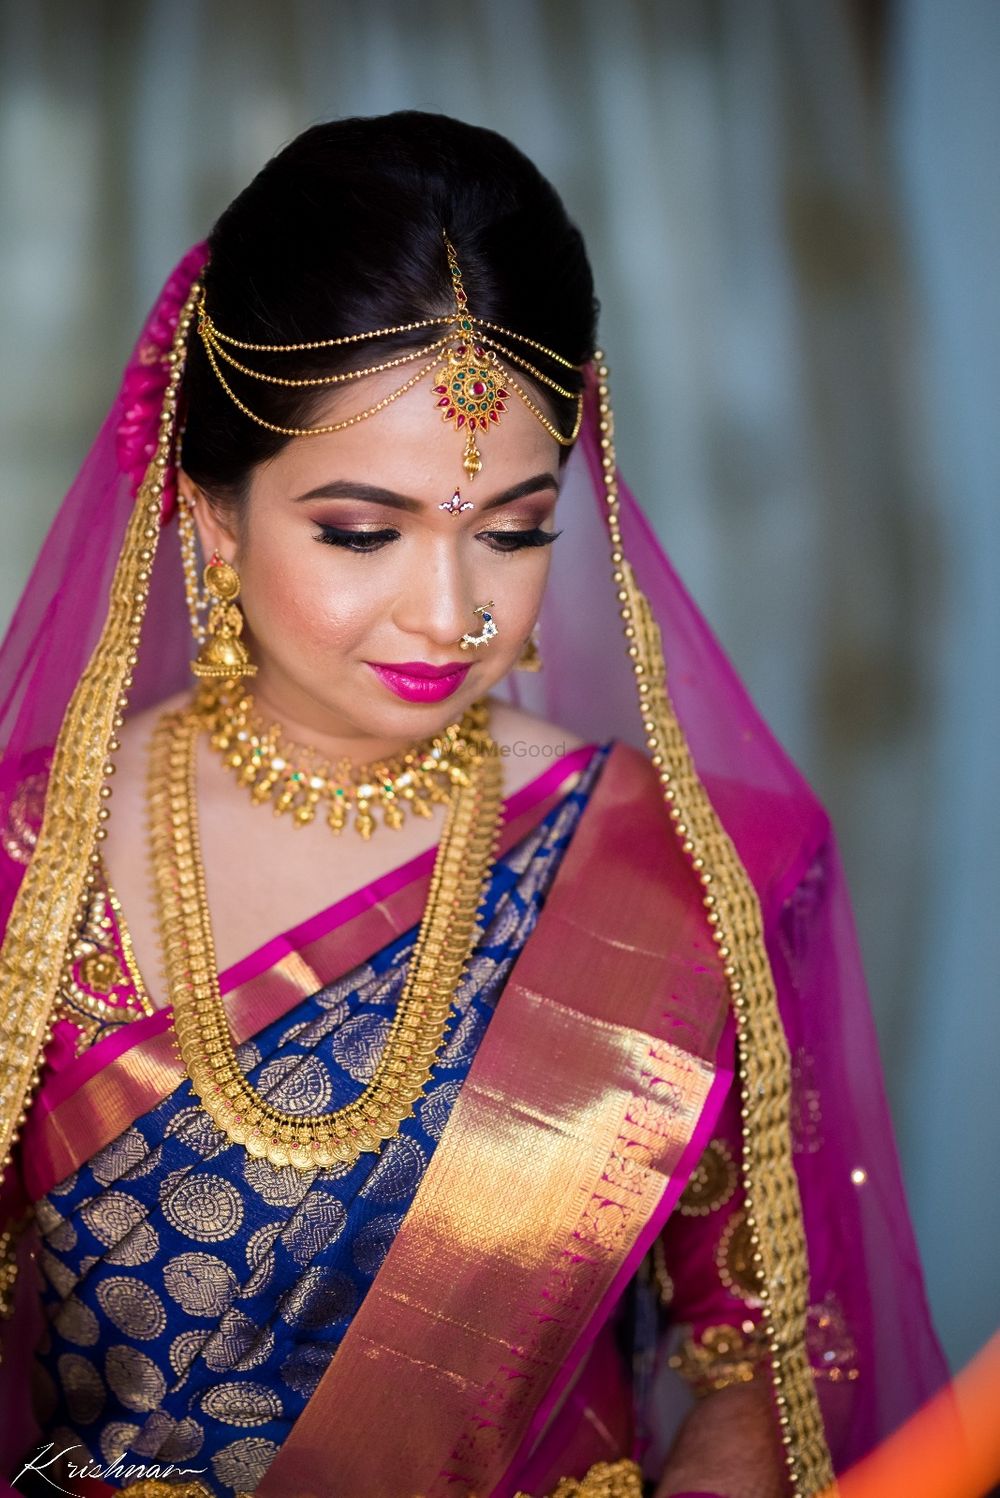 Photo of South Indian bride in contrasting combination kanjiavaram and dupatta